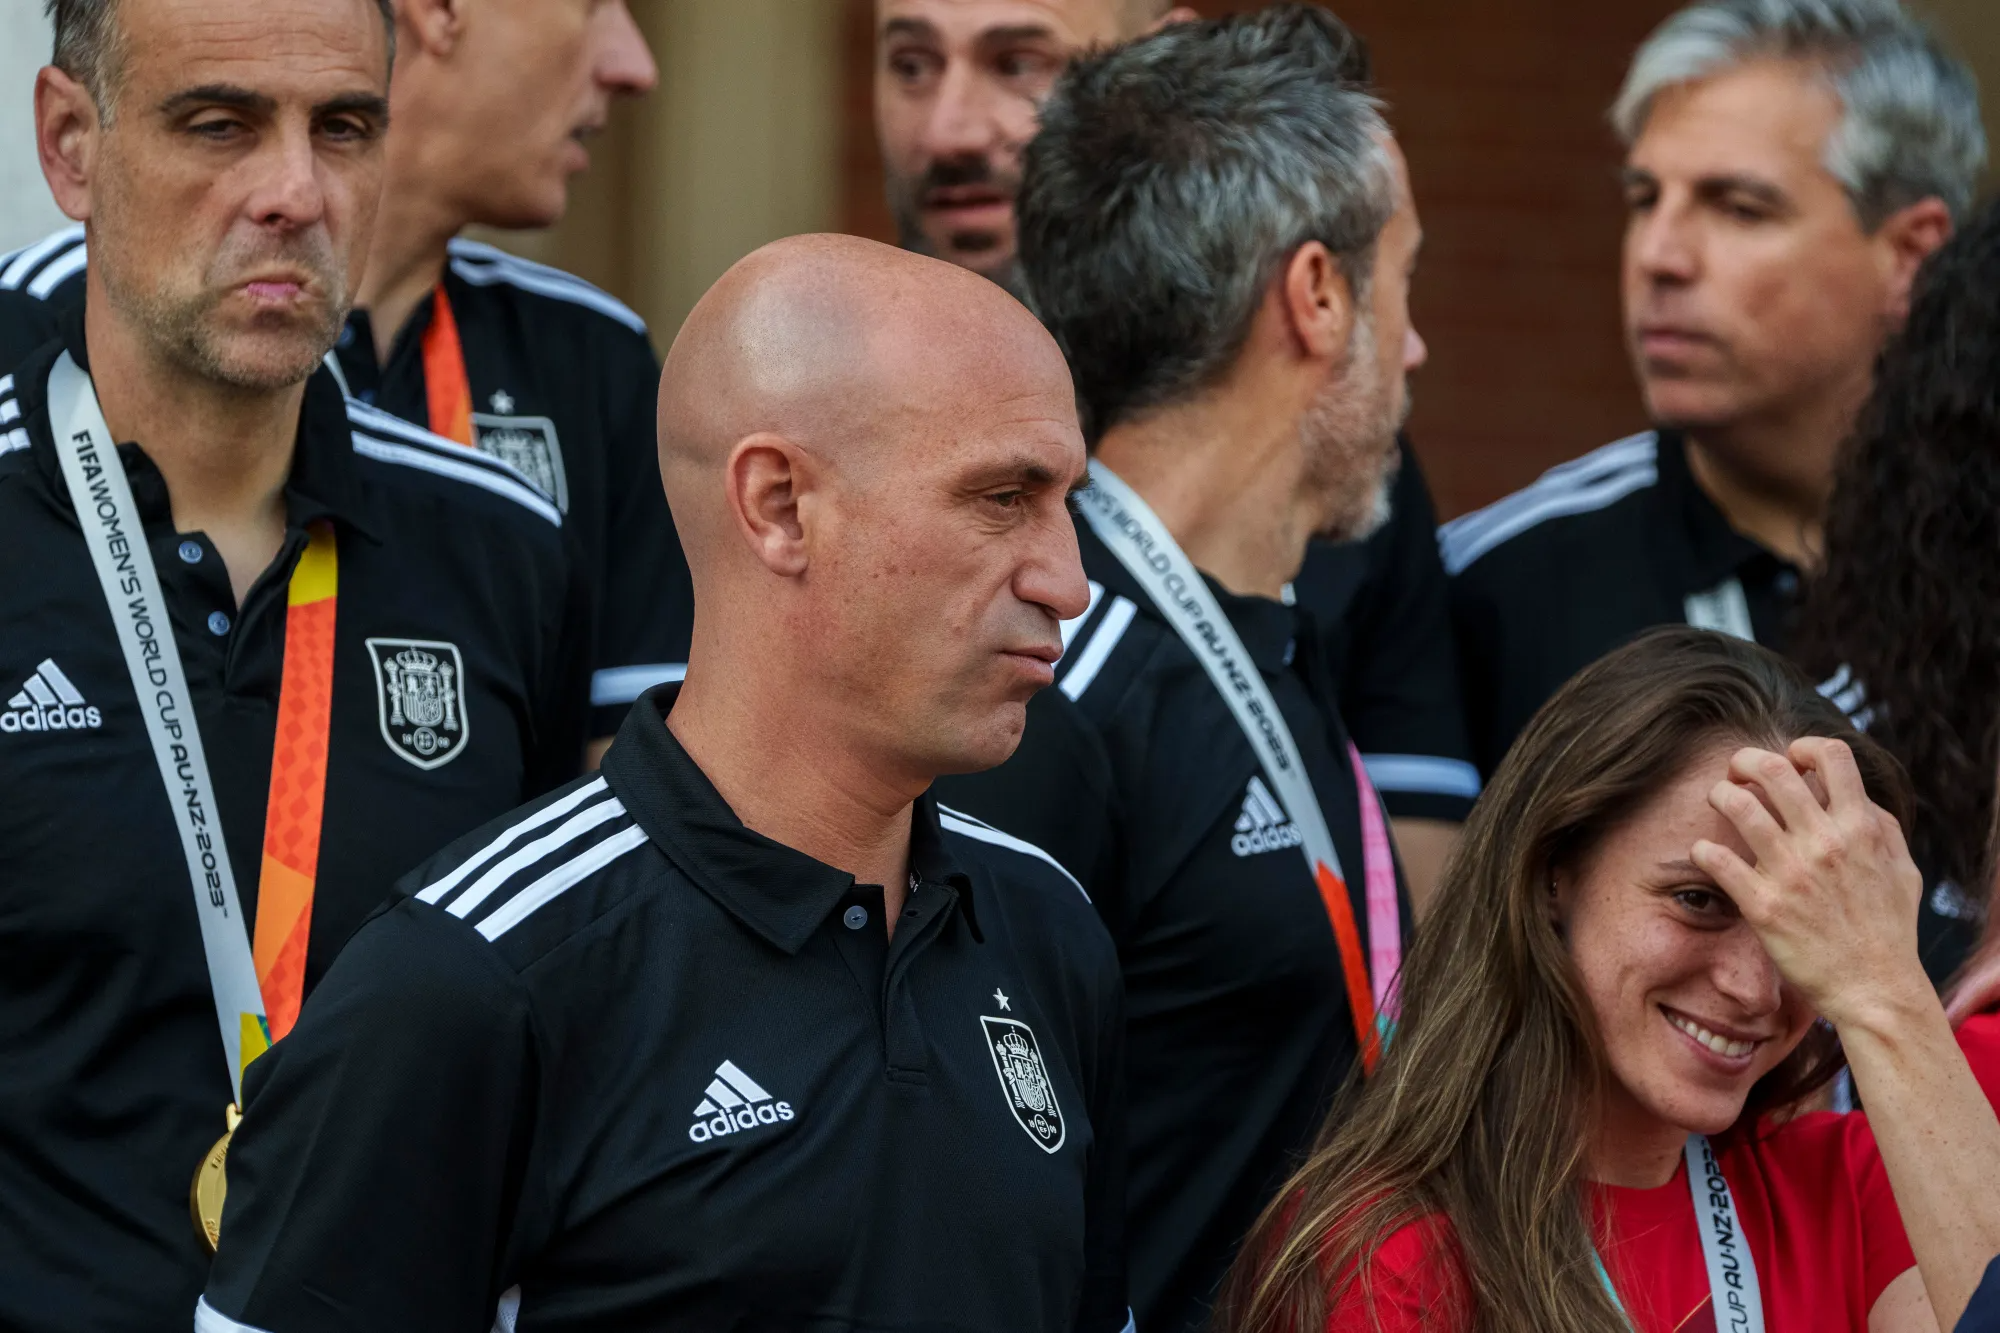 Prosecutor's Office Opens Investigation Into RFEF Head Rubiales For Sexual Assault